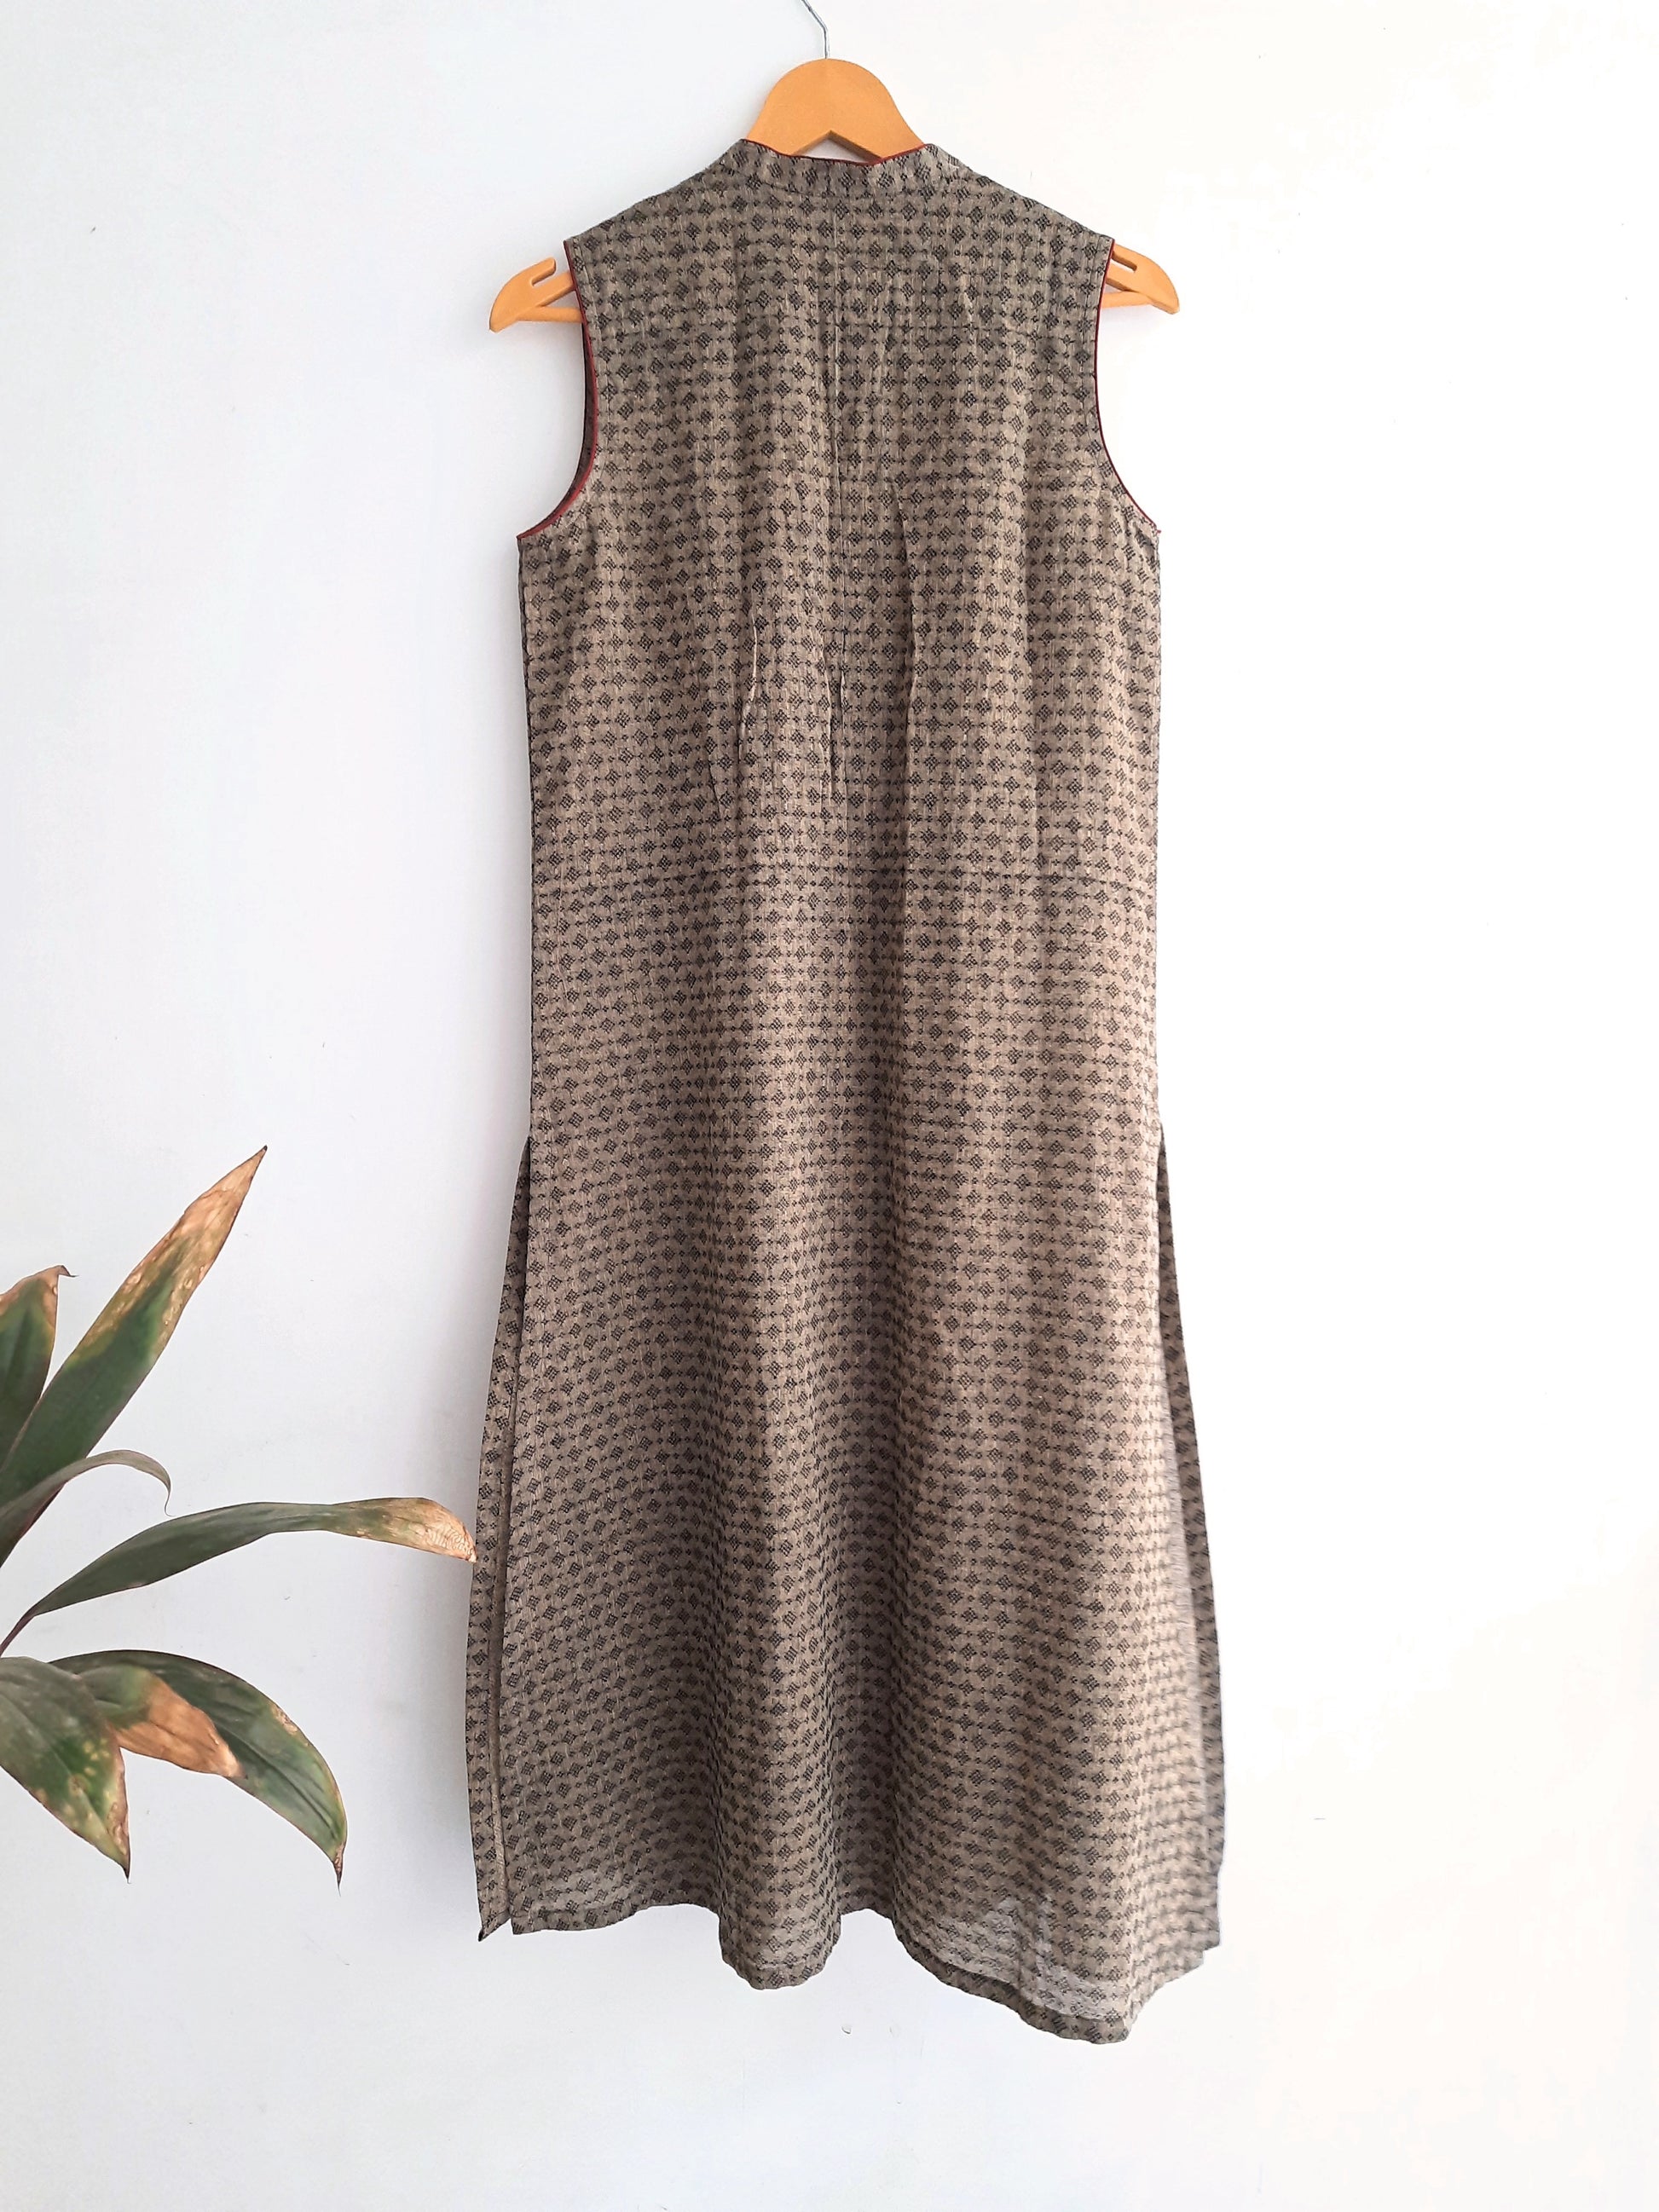 Serene Olive Coord Set - Elevate your wardrobe sustainably with this soft mangalagiri cotton ensemble. Muted olive green with a woven self design, mandarin collar, and beautiful pin tucks. Paired with elasticated waistband pants, it's perfect for everyday wear. Ethically crafted for conscious fashion choices.